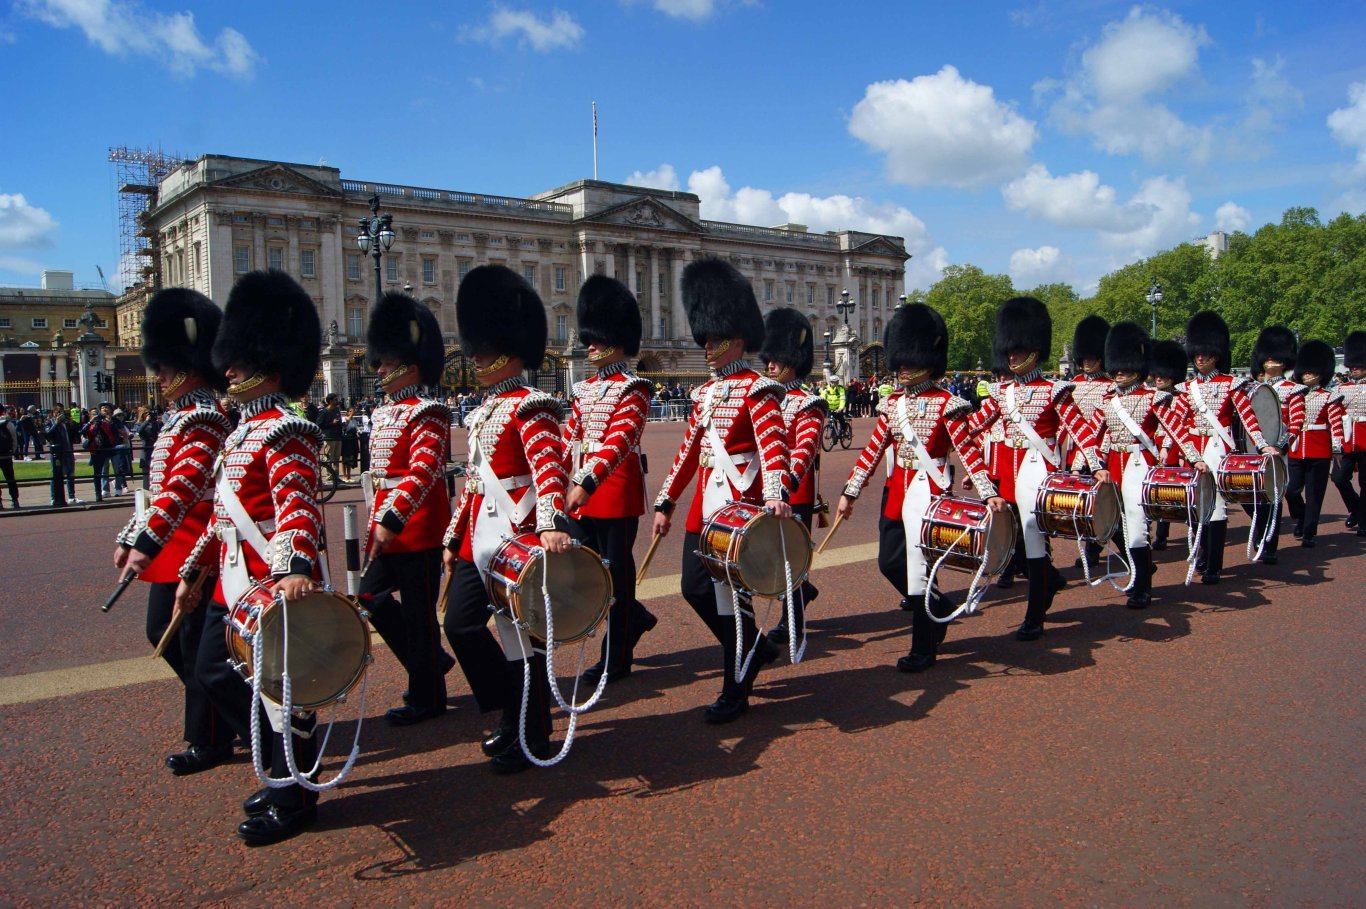 Guards and military bands marching up the Mall in London as part of the yearly Trooping the Colour parade